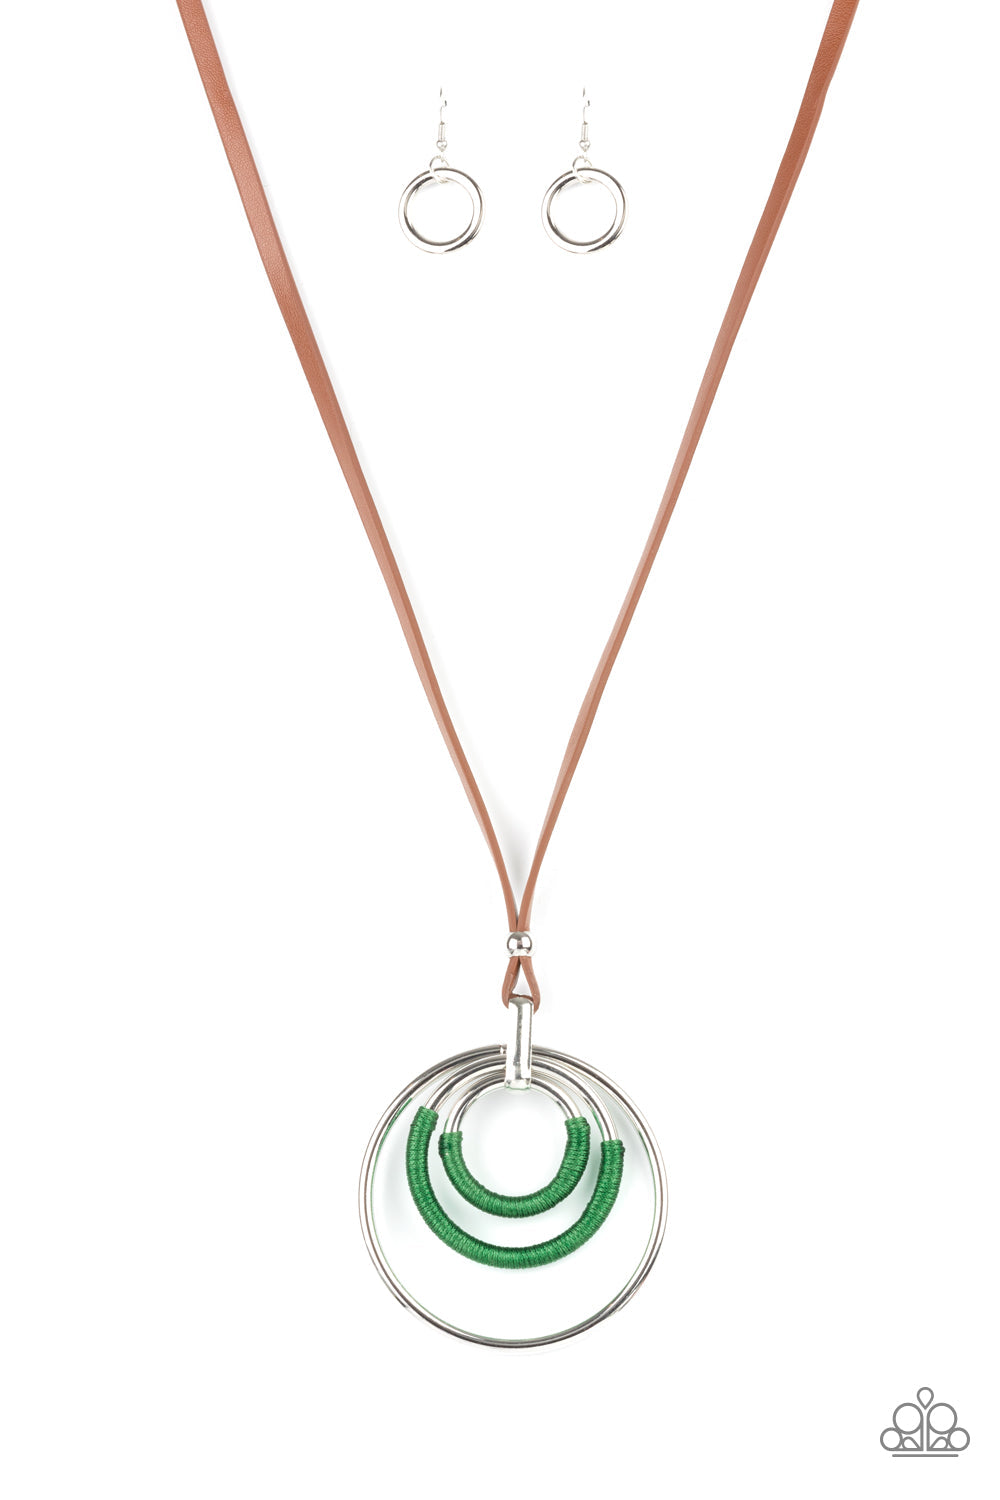 Hypnotic Happenings - Green - Silver - Brown Leather Necklace - Paparazzi Accessories - 
An impressive set of thick silver hoops is held together in concentric fashion by a strong silver fitting. Boldly wrapped bright green thread accents two hoops as the hefty pendant suspends from a lengthened brown leather cord in a hypnotic display. Features an adjustable clasp closure.
